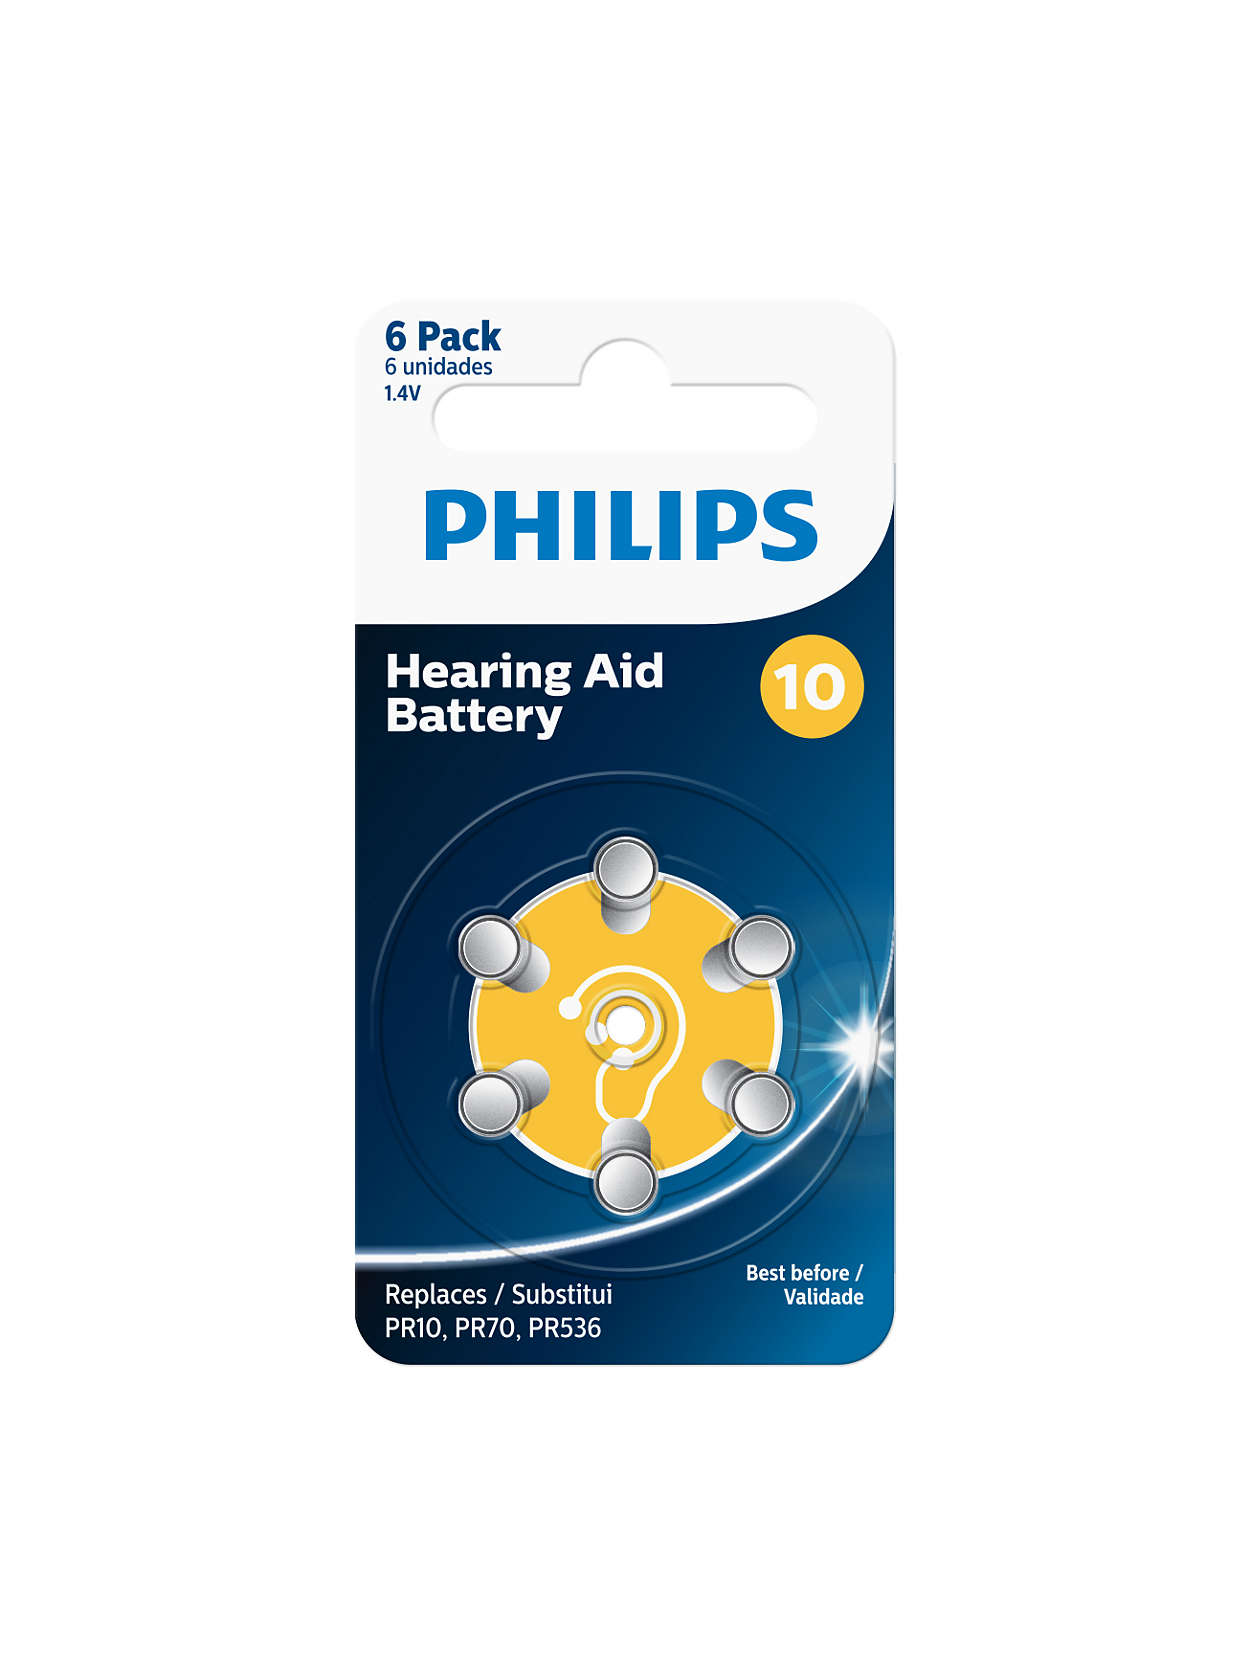 Top quality Zinc-air technology for hearing aids